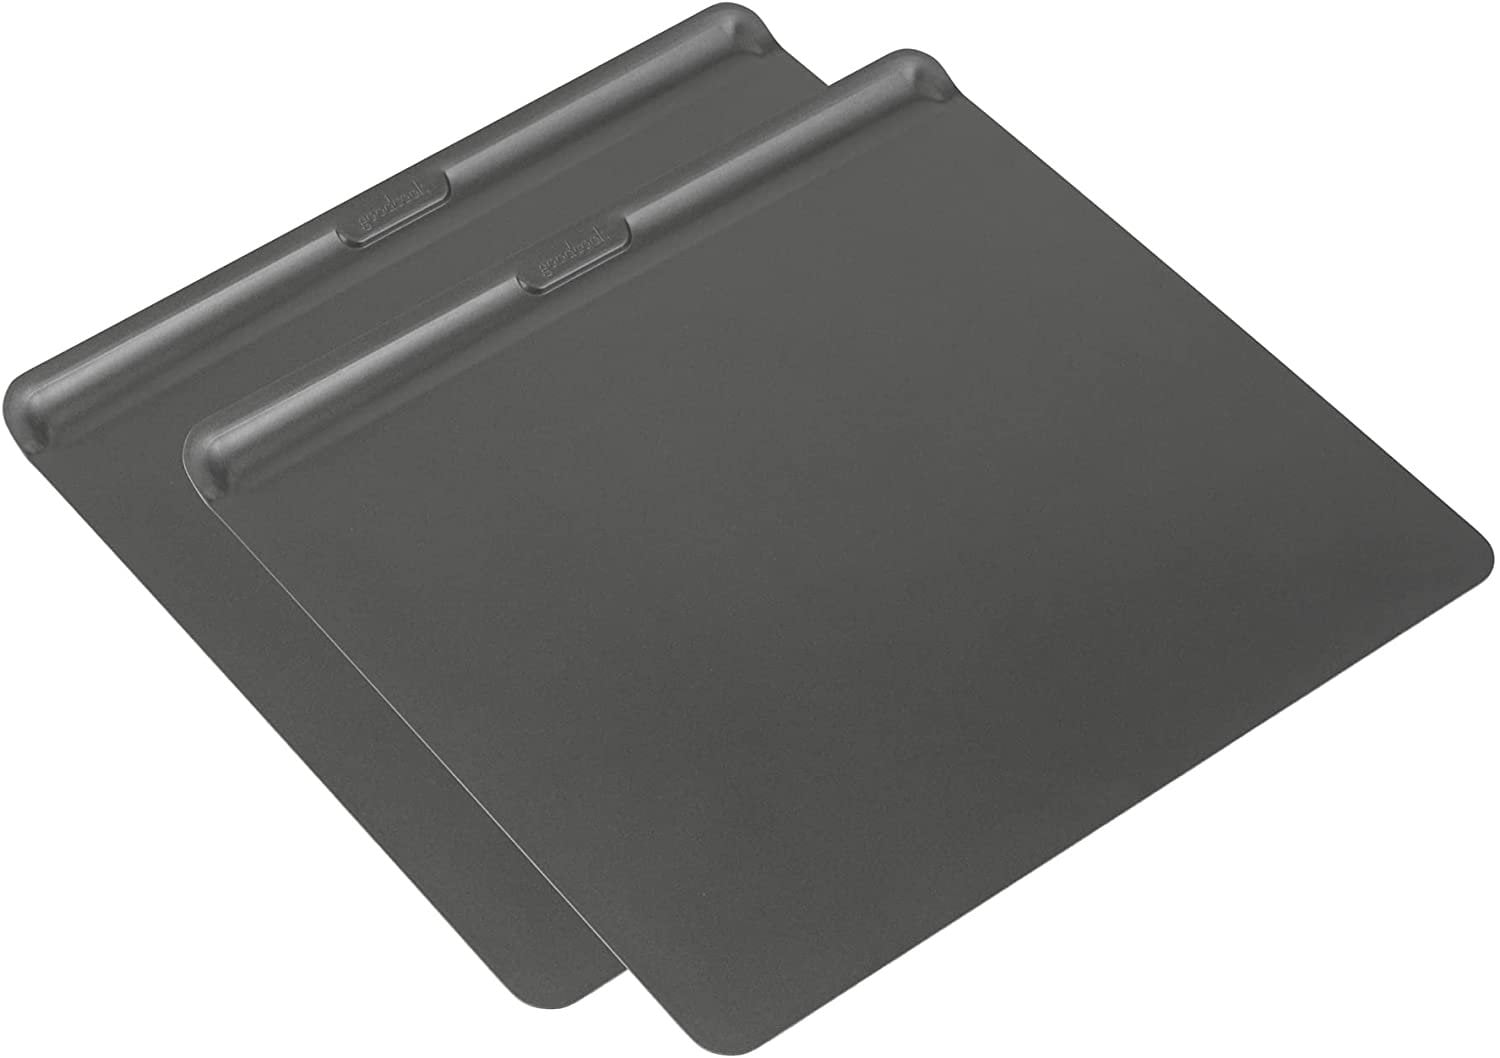 HONGBAKE Large Flat Cookie Sheet No Edges, Nonstick Insulated Baking Pan,  Commercial Oven Trays for Cooking 2 Pieces, 16 X 14, Grey